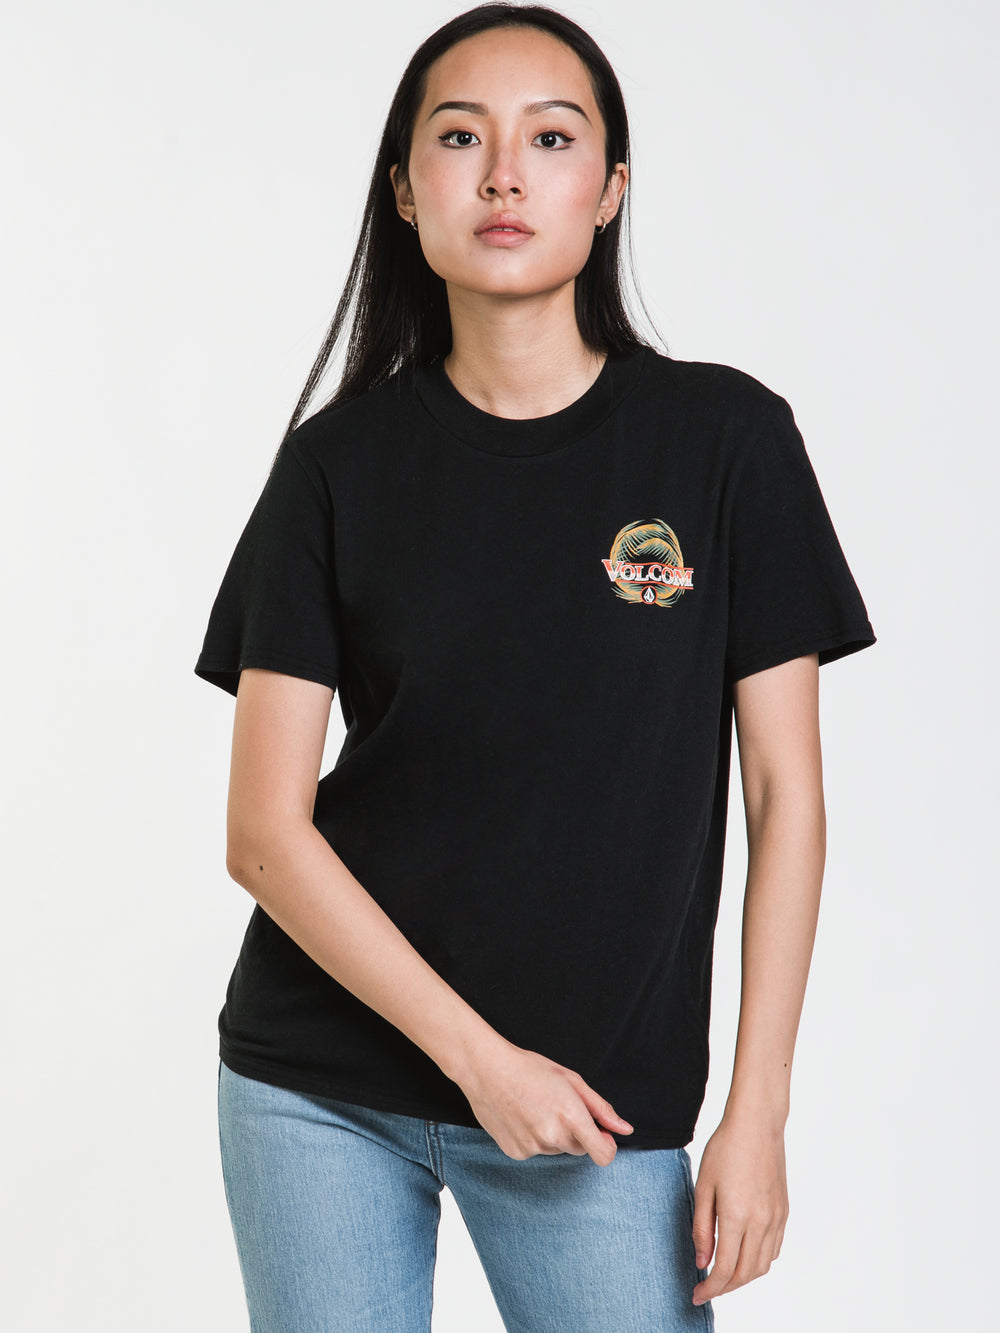 VOLCOM ONE MINUTE MORE T-SHIRT - CLEARANCE